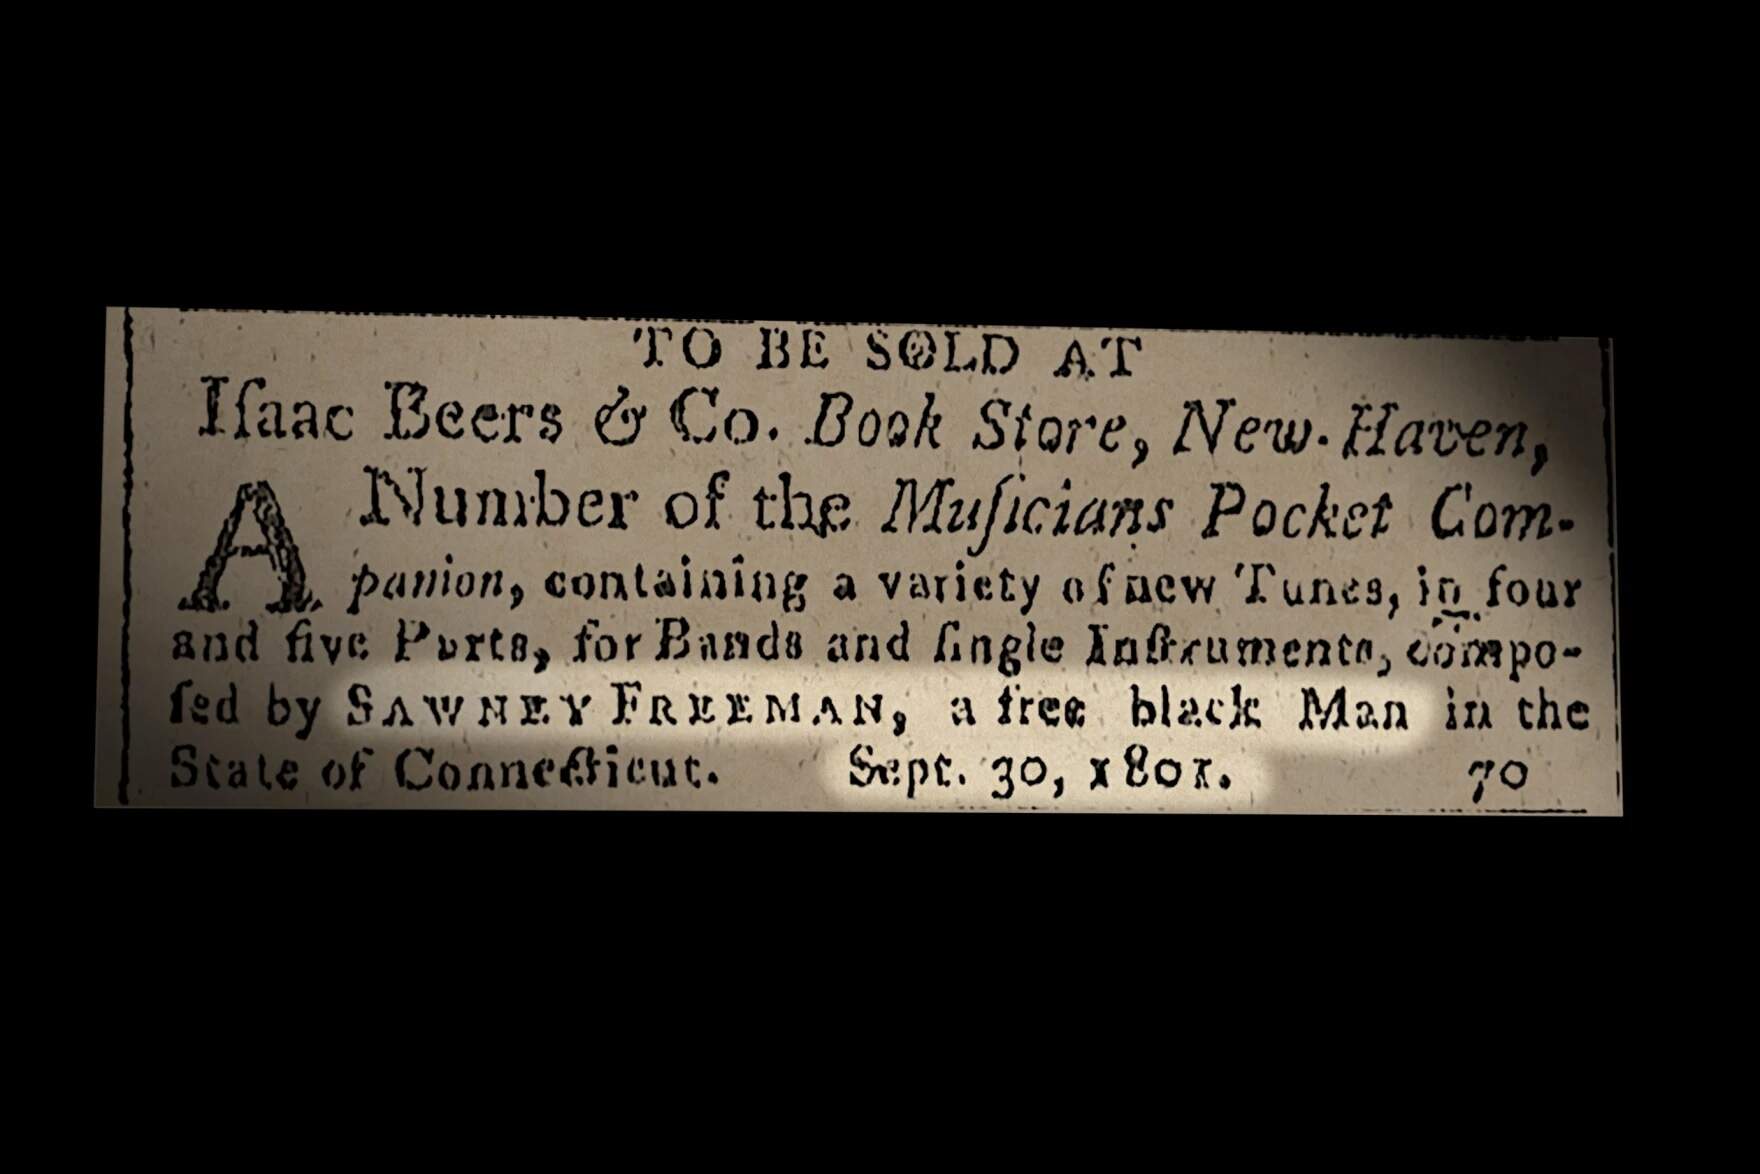 A copy of the original advertisement from Sept. 30, 1801 for &quot;The Musicians Pocket Companion&quot; with music composed by Sawney Freeman. (Connecticut Journal In New Haven via Connecticut Public)